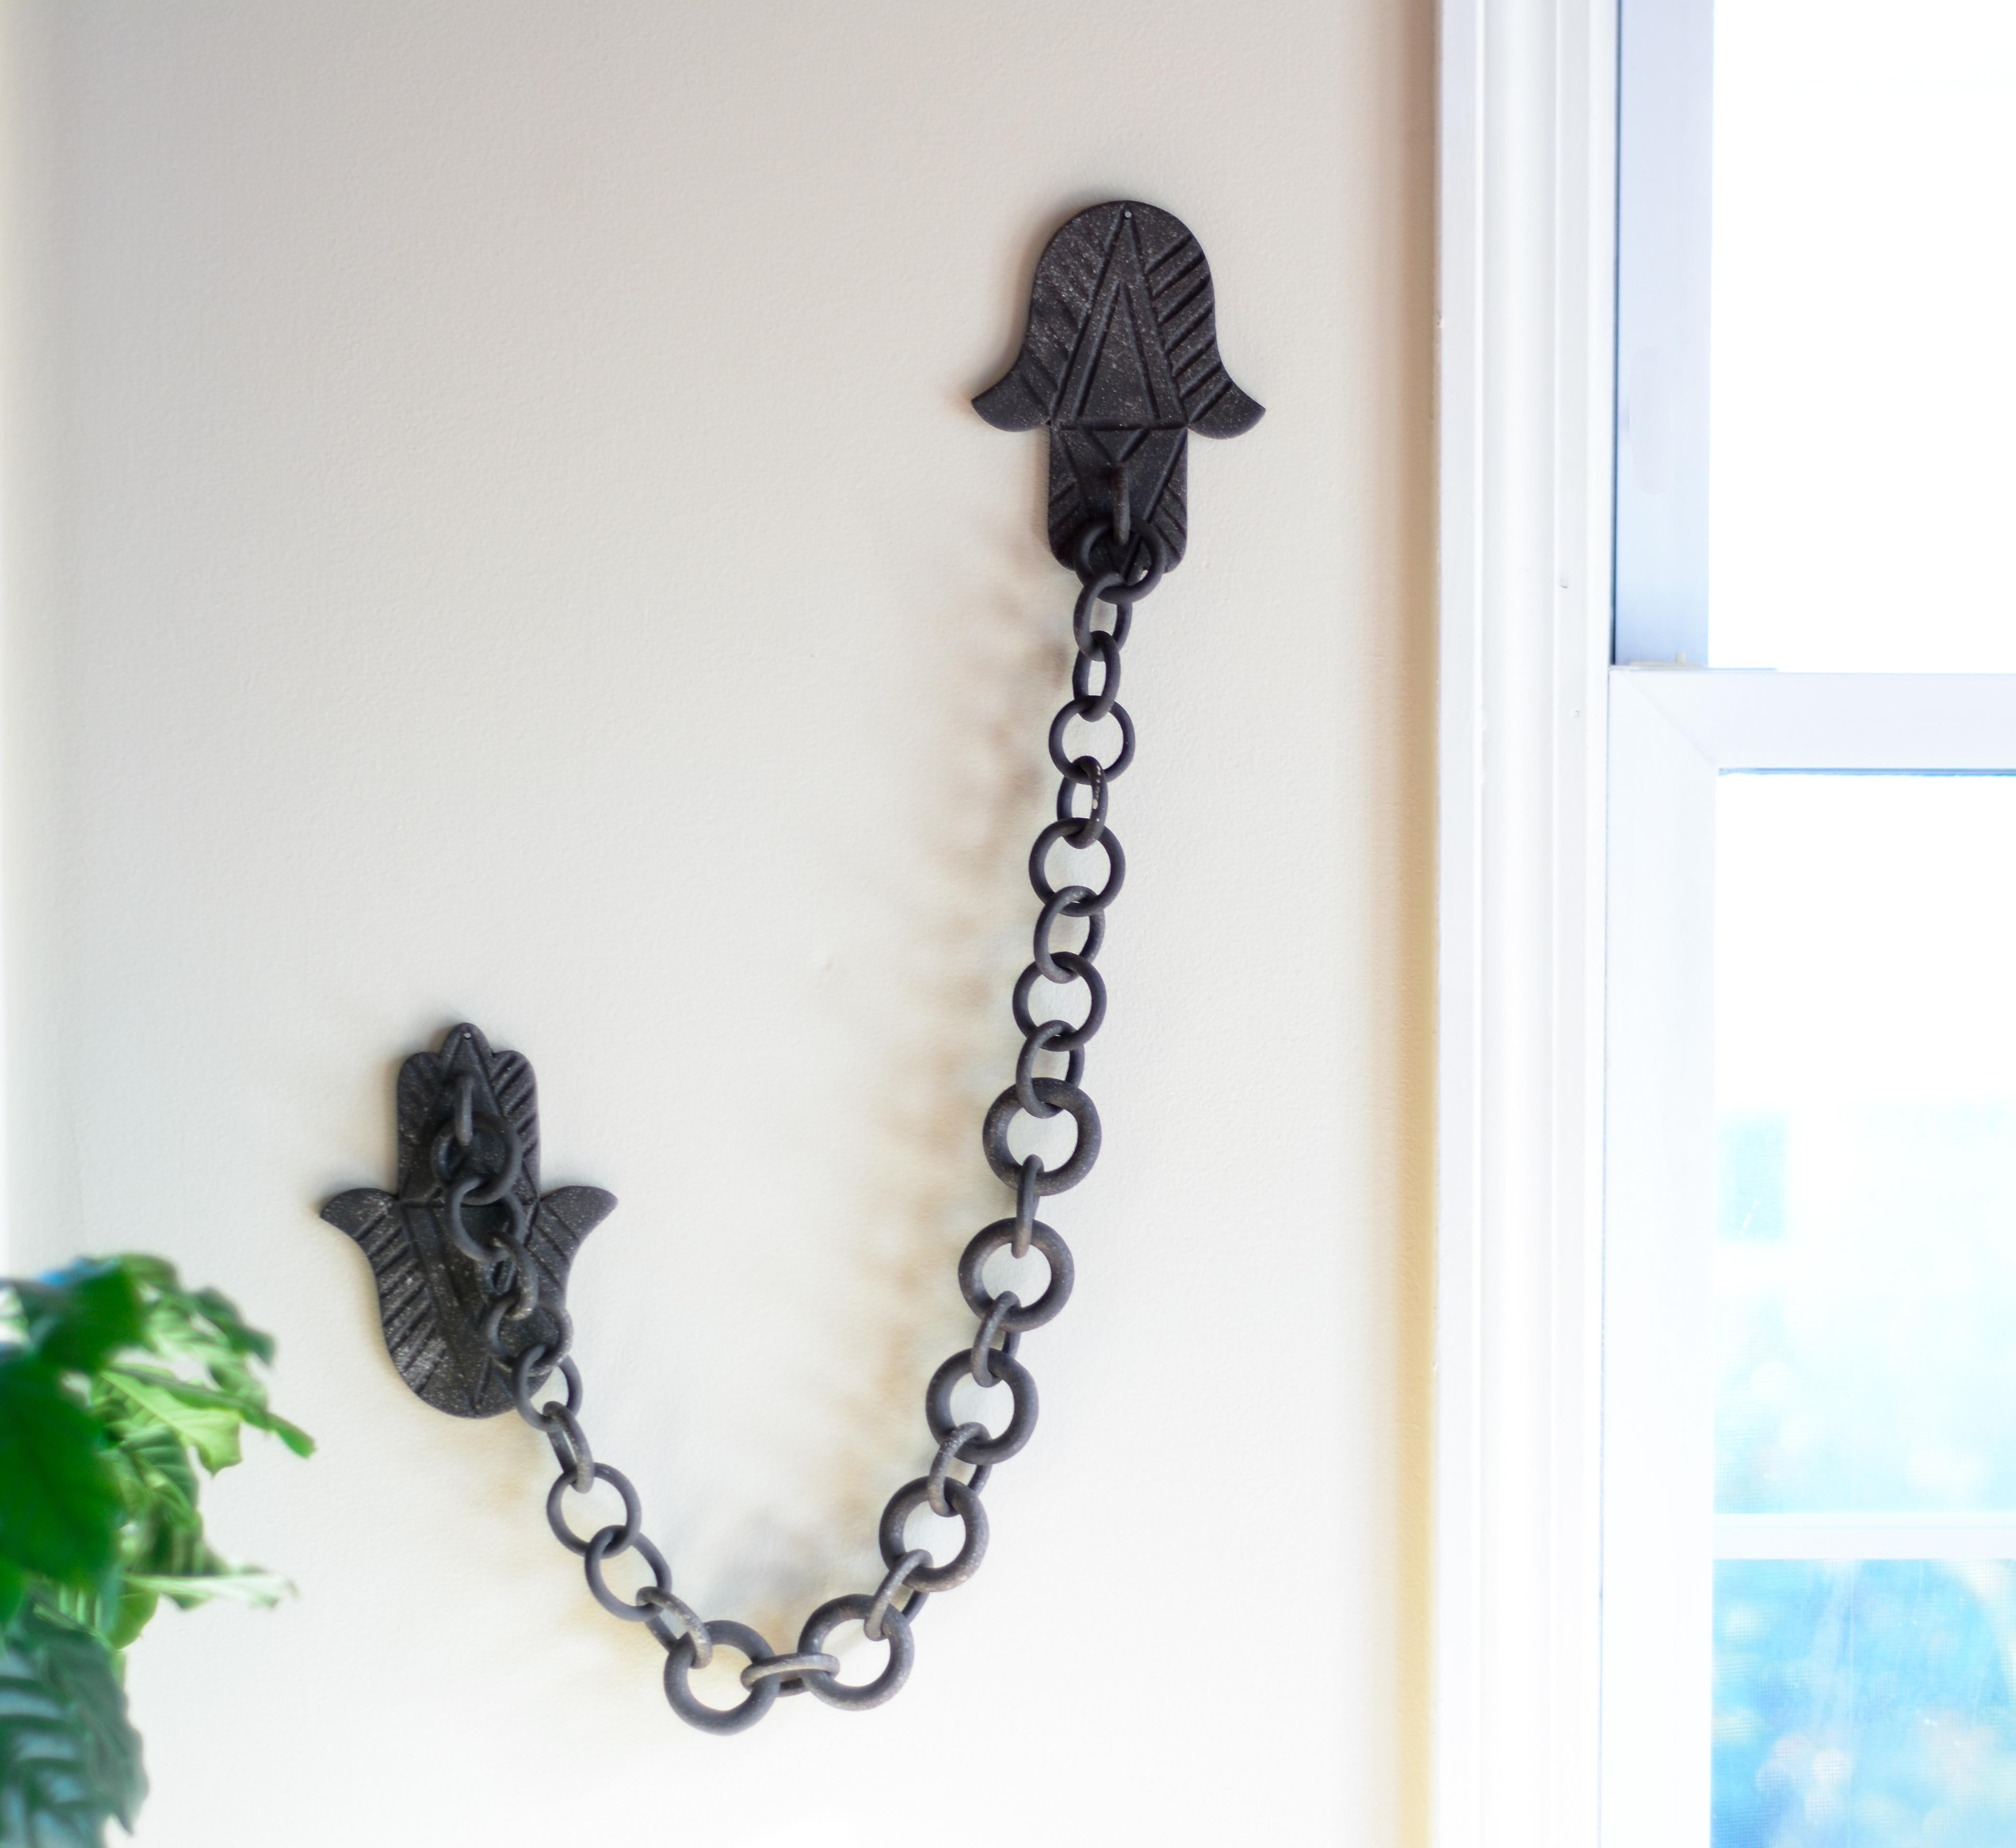 American Ceramic Hand Link Chain Wall Sculpture by Asmaa Aman Tran